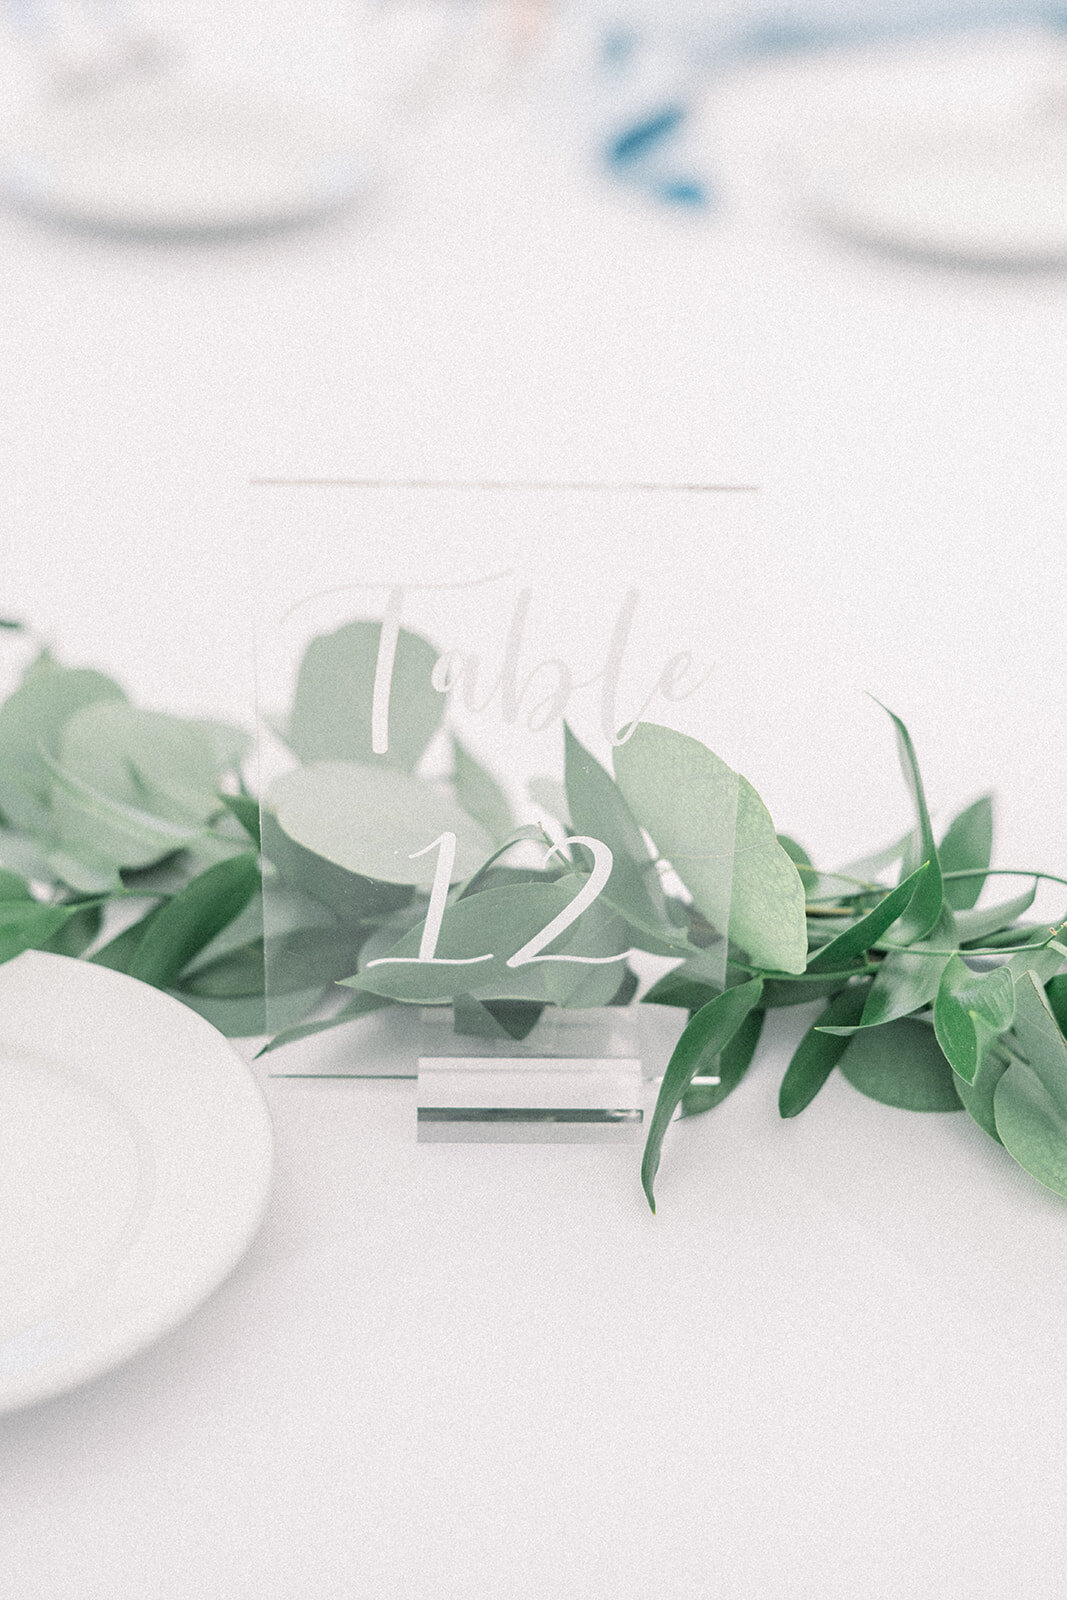 wedding reception table numbers at Dolphin Bay Resort in Pismo Beach, CA